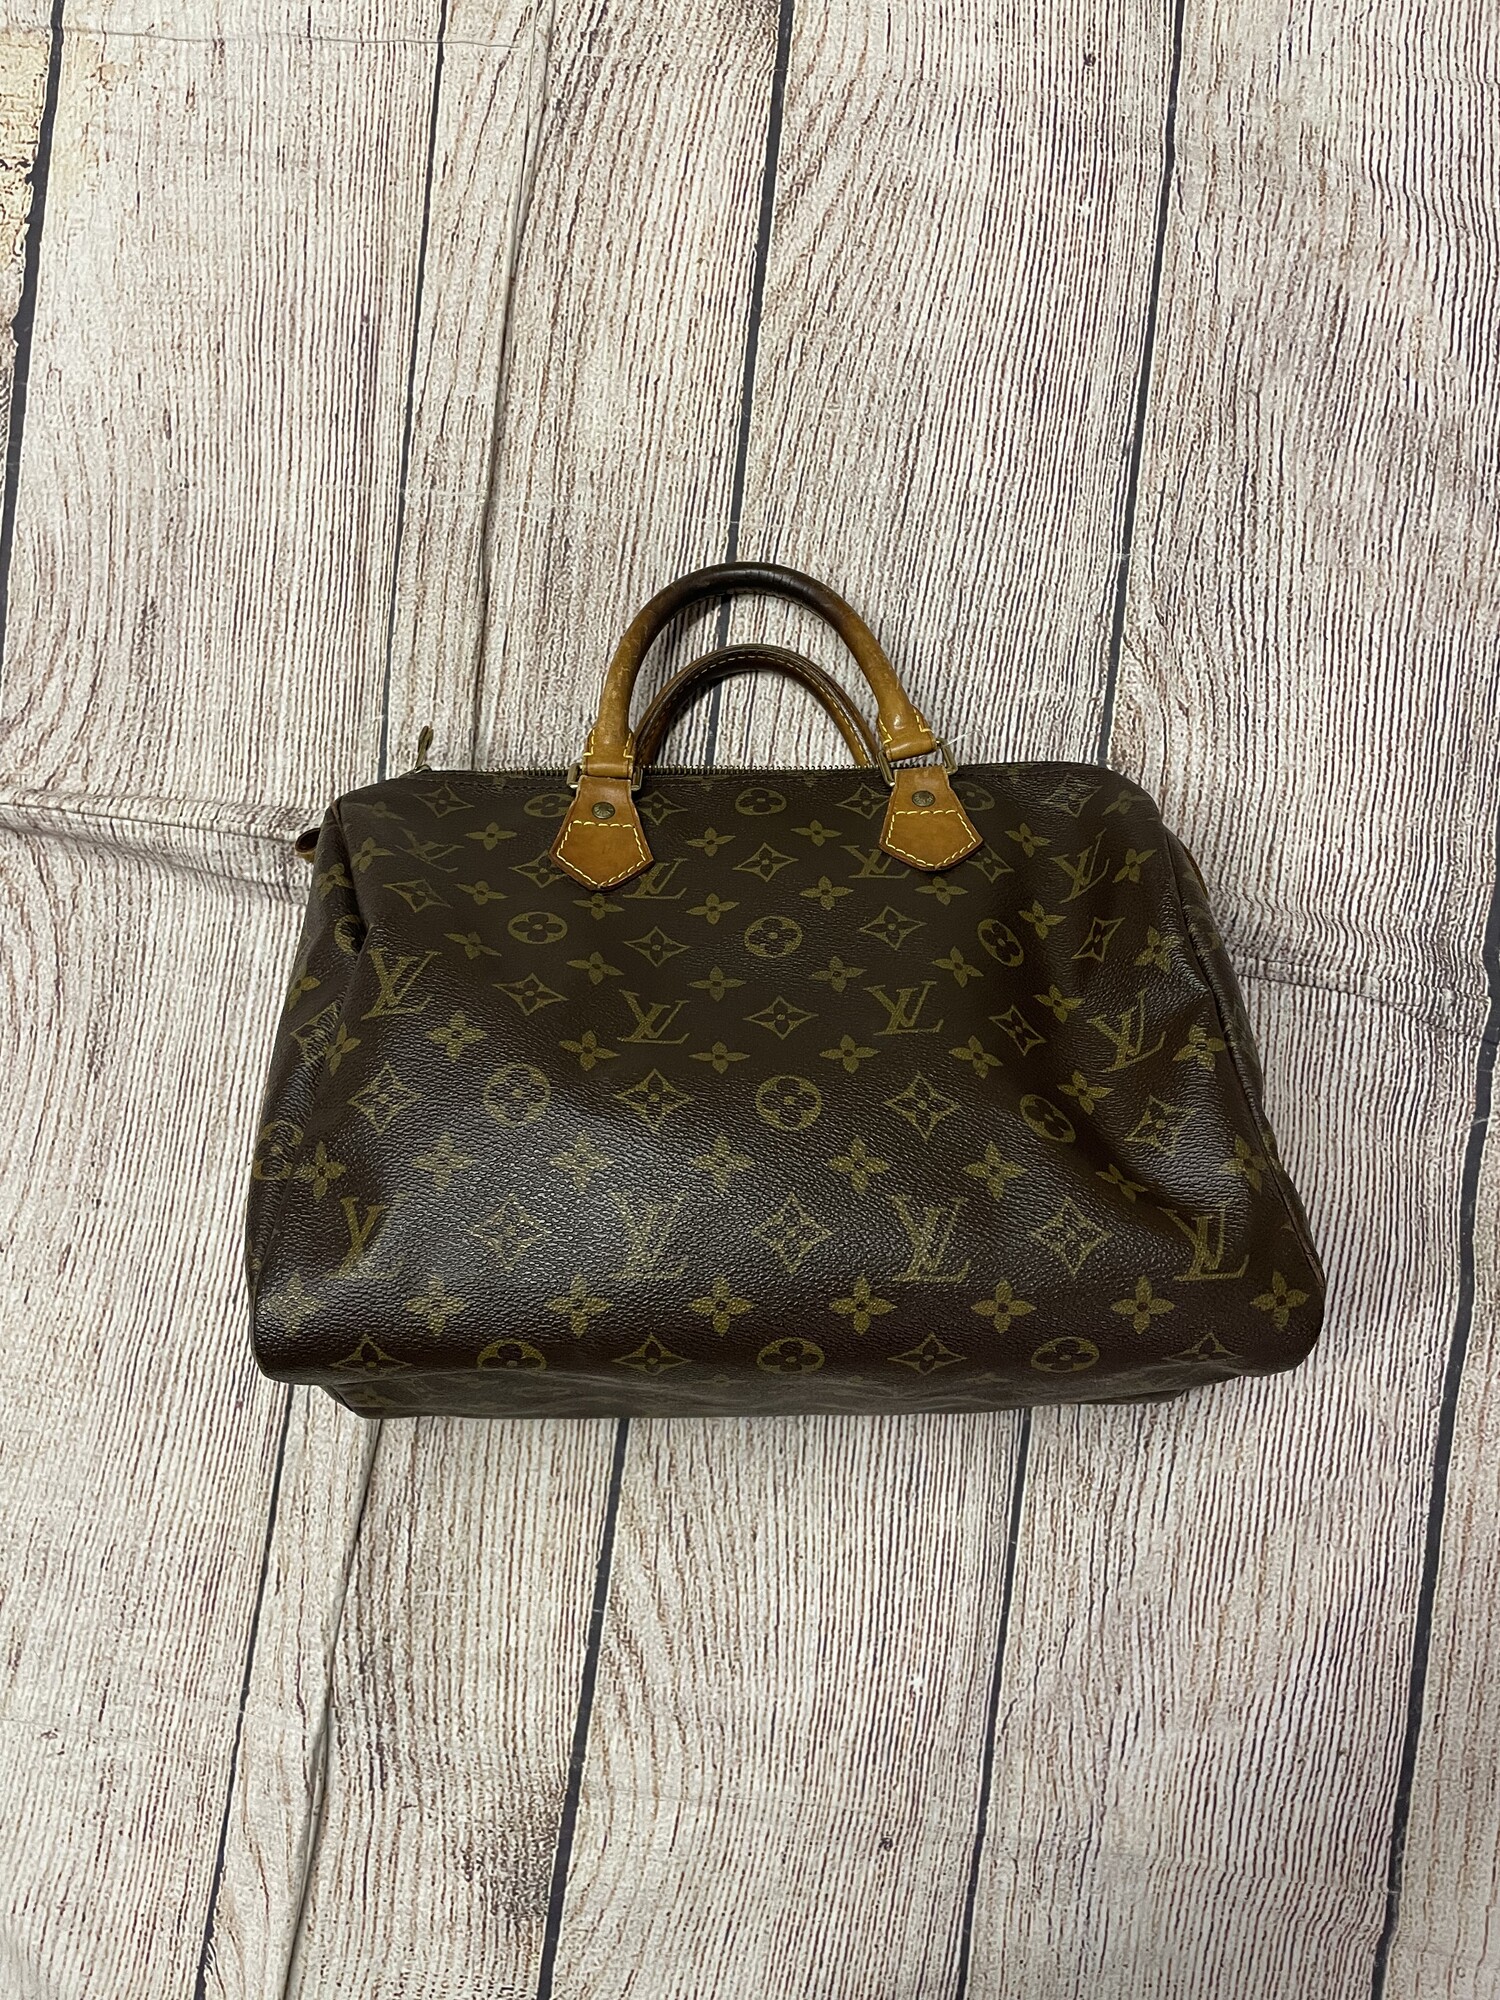 LV Louis Vuitton Monogram Speedy 30

Moderate patina at trim and handles cracking on tabs/handles, moderate spot at interior.

Good condition

11.8” (L) x 8.3” (H) x 6.7” (D)

shipping may have addtional charge for insurance.